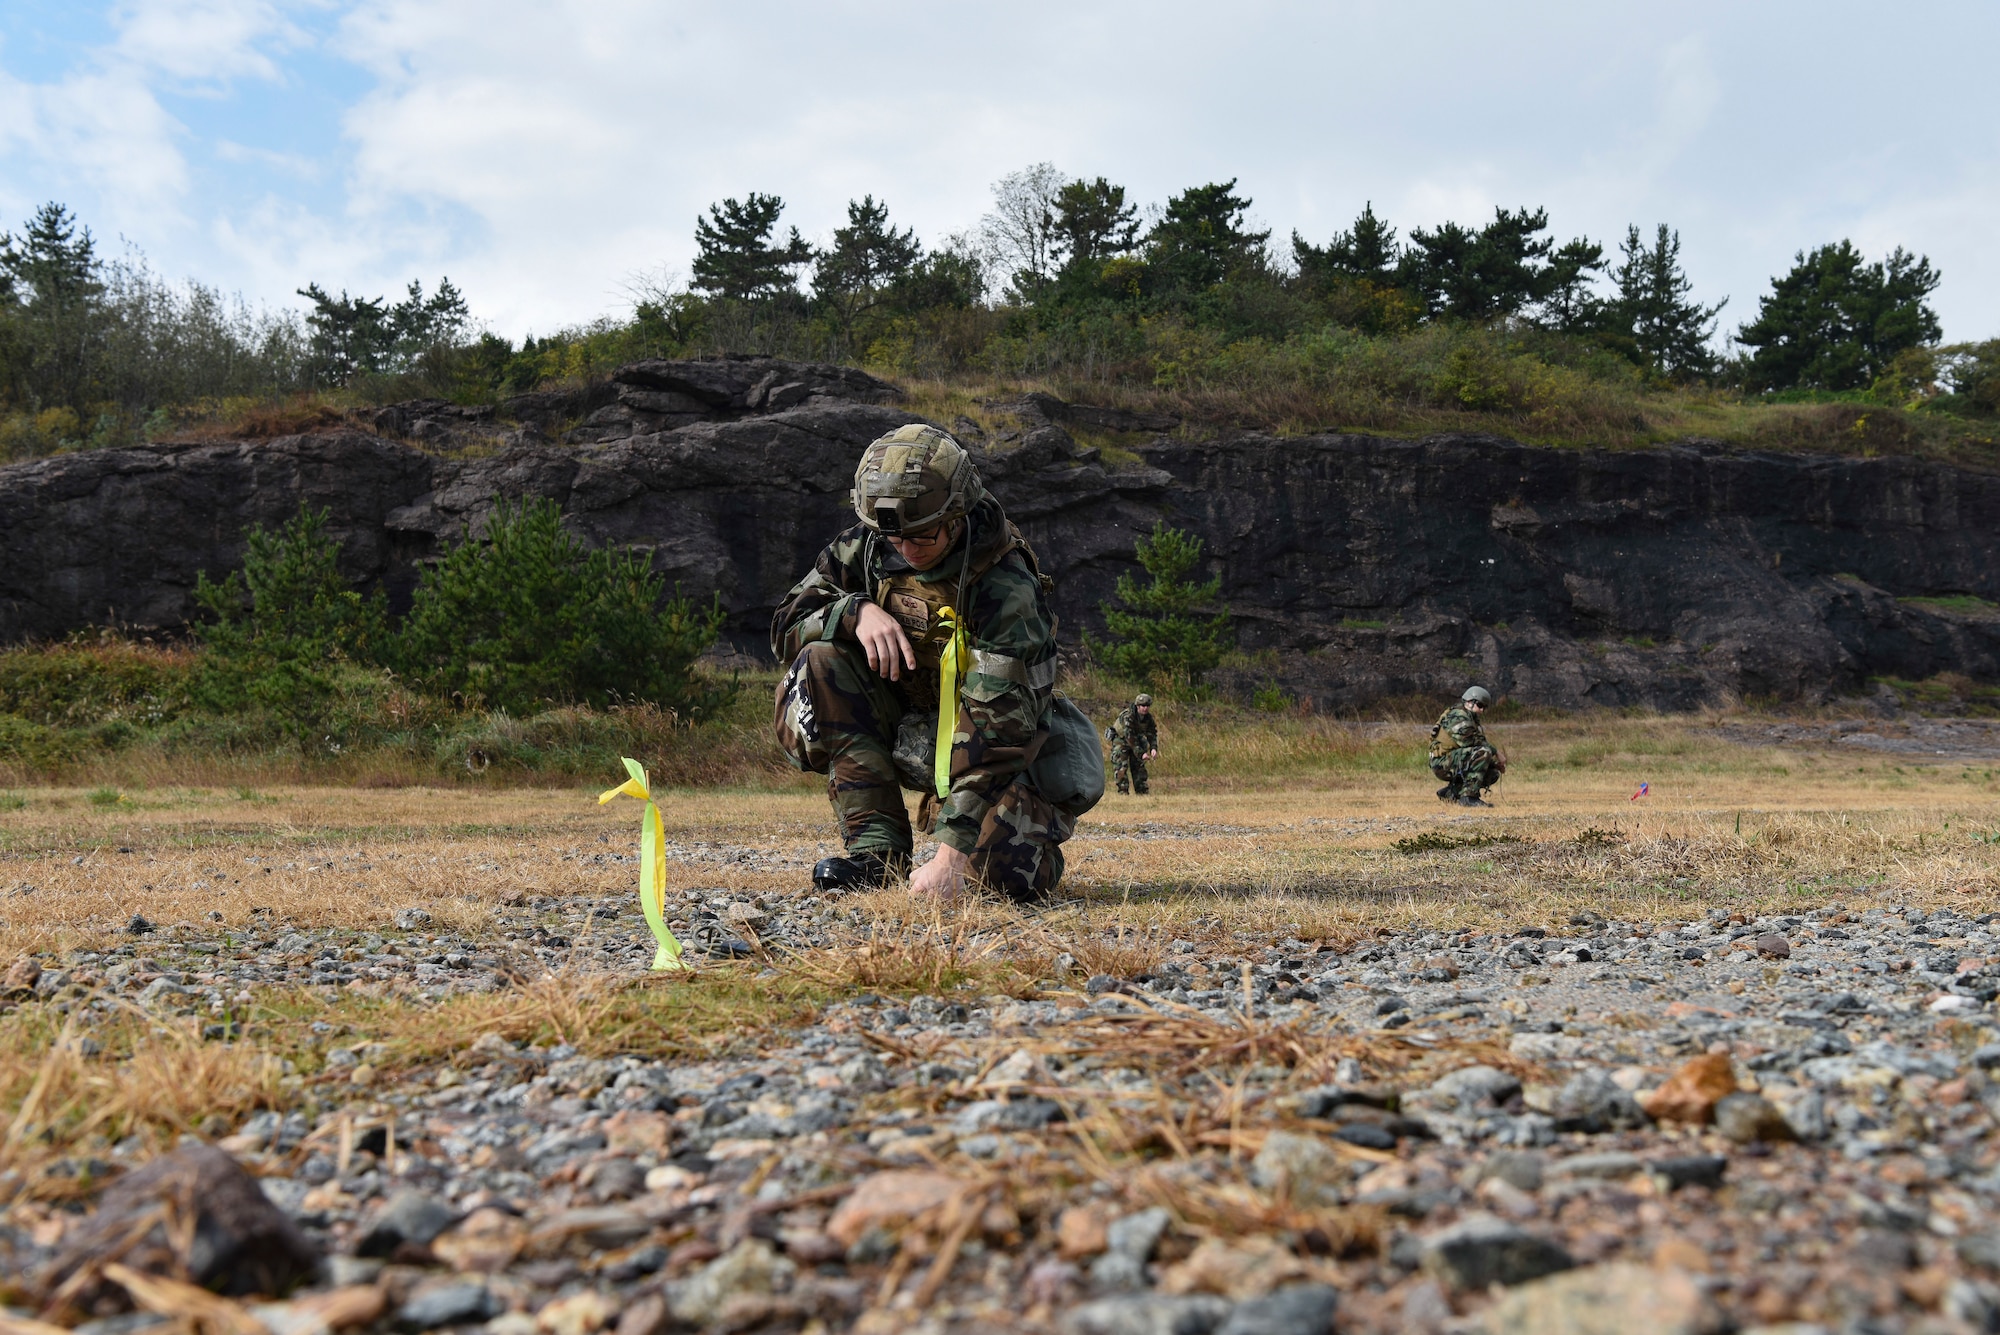 Explosive Ordnance Disposal Airmen from the 8th Civil Engineer Squadron place and activate training charges at Kunsan Air Base, Republic of Korea, Oct. 29, 2018. Routine practice scenarios such as this help the team improve safety, speed, and efficiency while also reinforcing readiness. (U.S. Air Force photo by Senior Airman Savannah Waters)